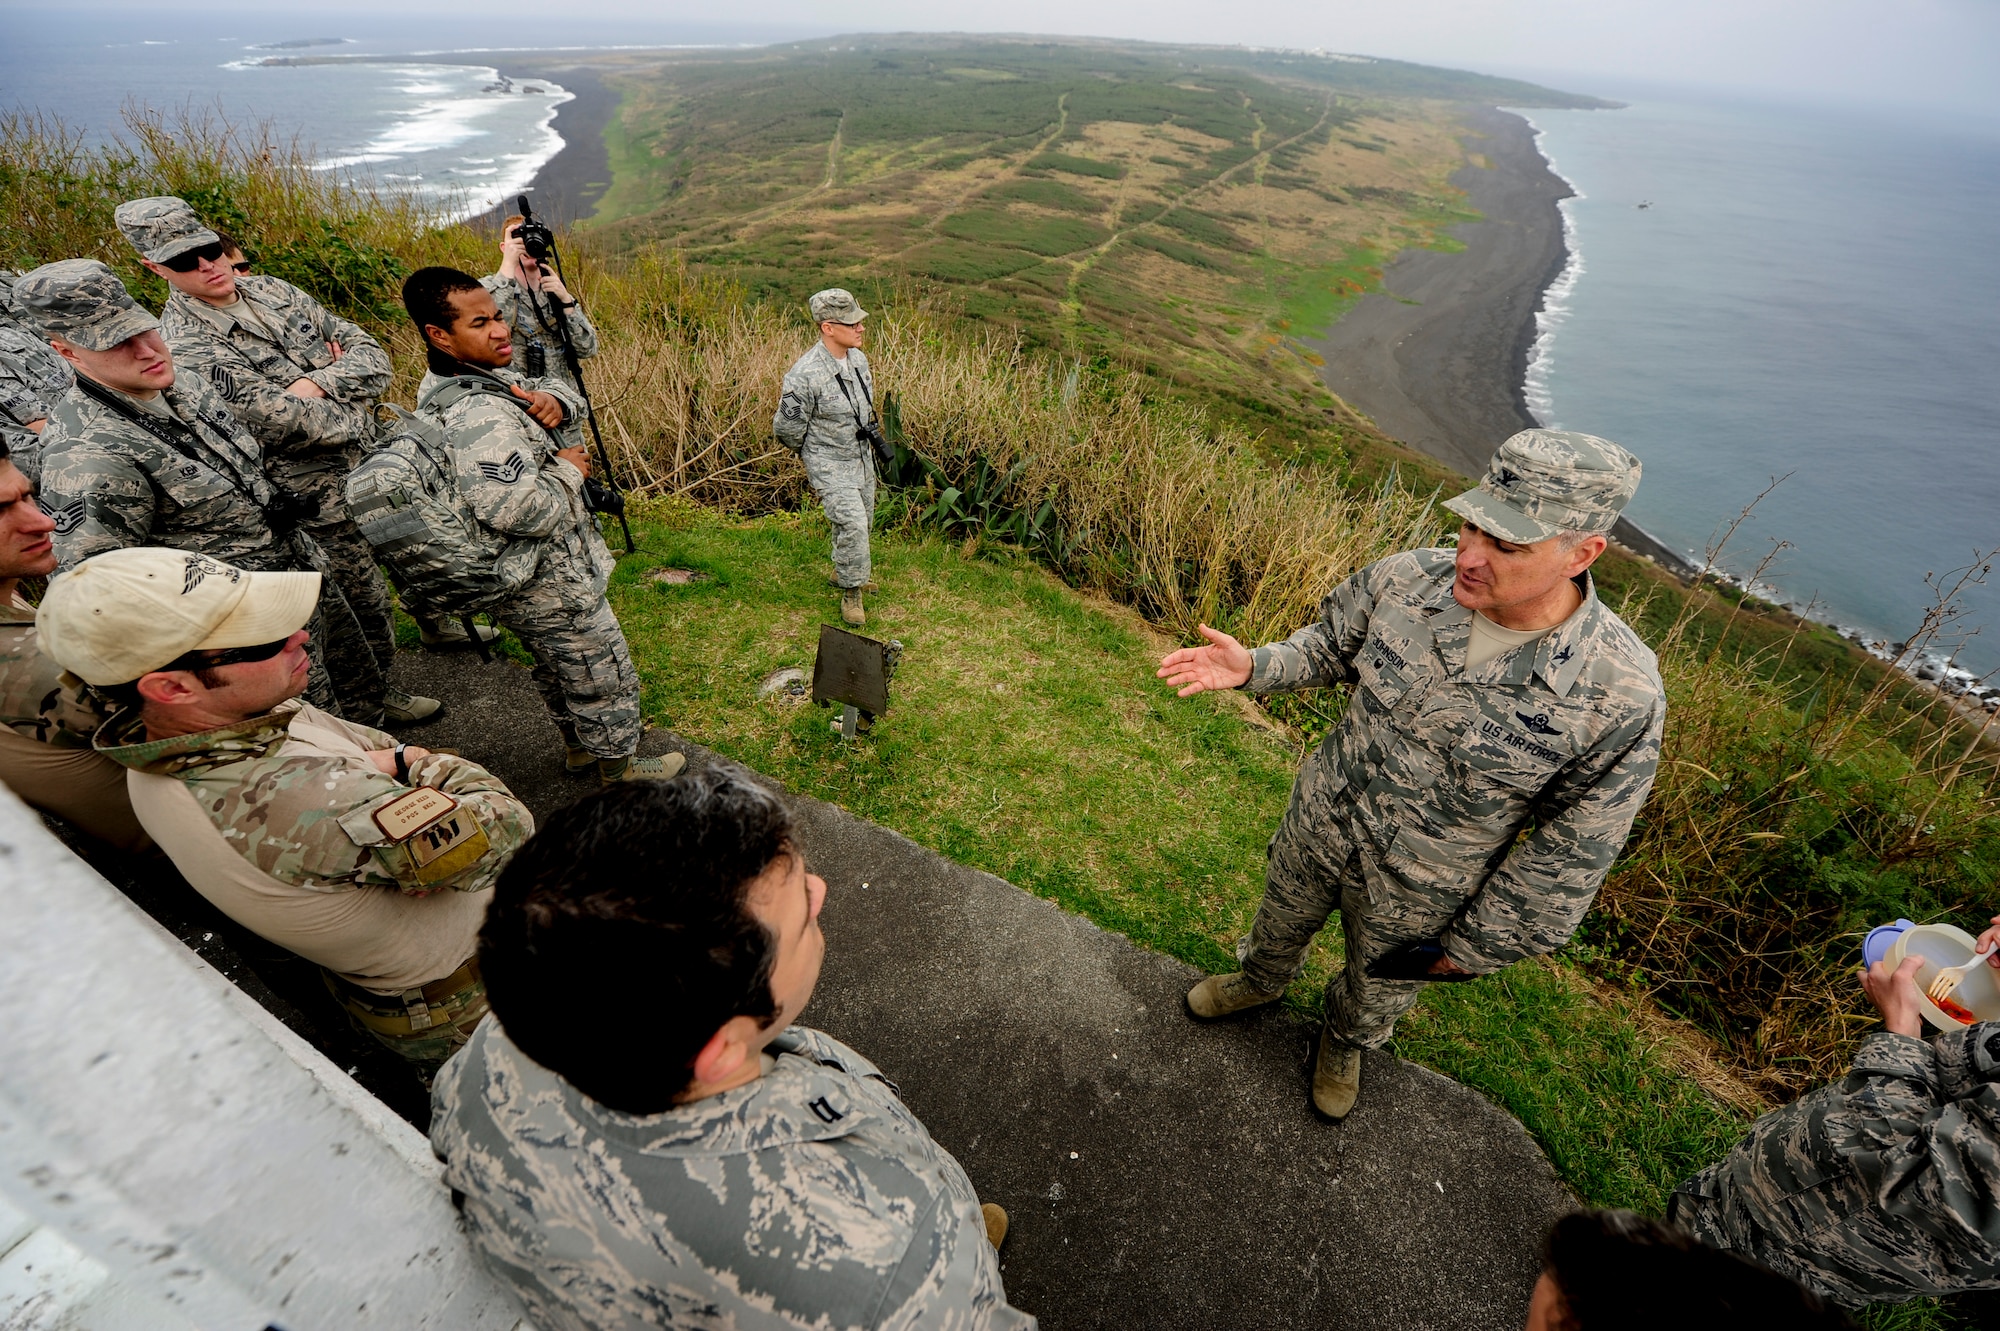 U.S Air Force Col. Paul Johnson, 18th Operations Group commander, delivers a history lesson on top of Mount Suribachi, Jan. 8, 2015, on Iwo To, Japan. He led a group of 32 Airmen from Kadena Air Base, Japan, on a tour through the Island, stopping at various historic sites to educate and pay respect to the U.S. Marines who lost their lives at the battle of Iwo Jima. (U.S. Air Force photo by Airman 1st Class John Linzmeier)